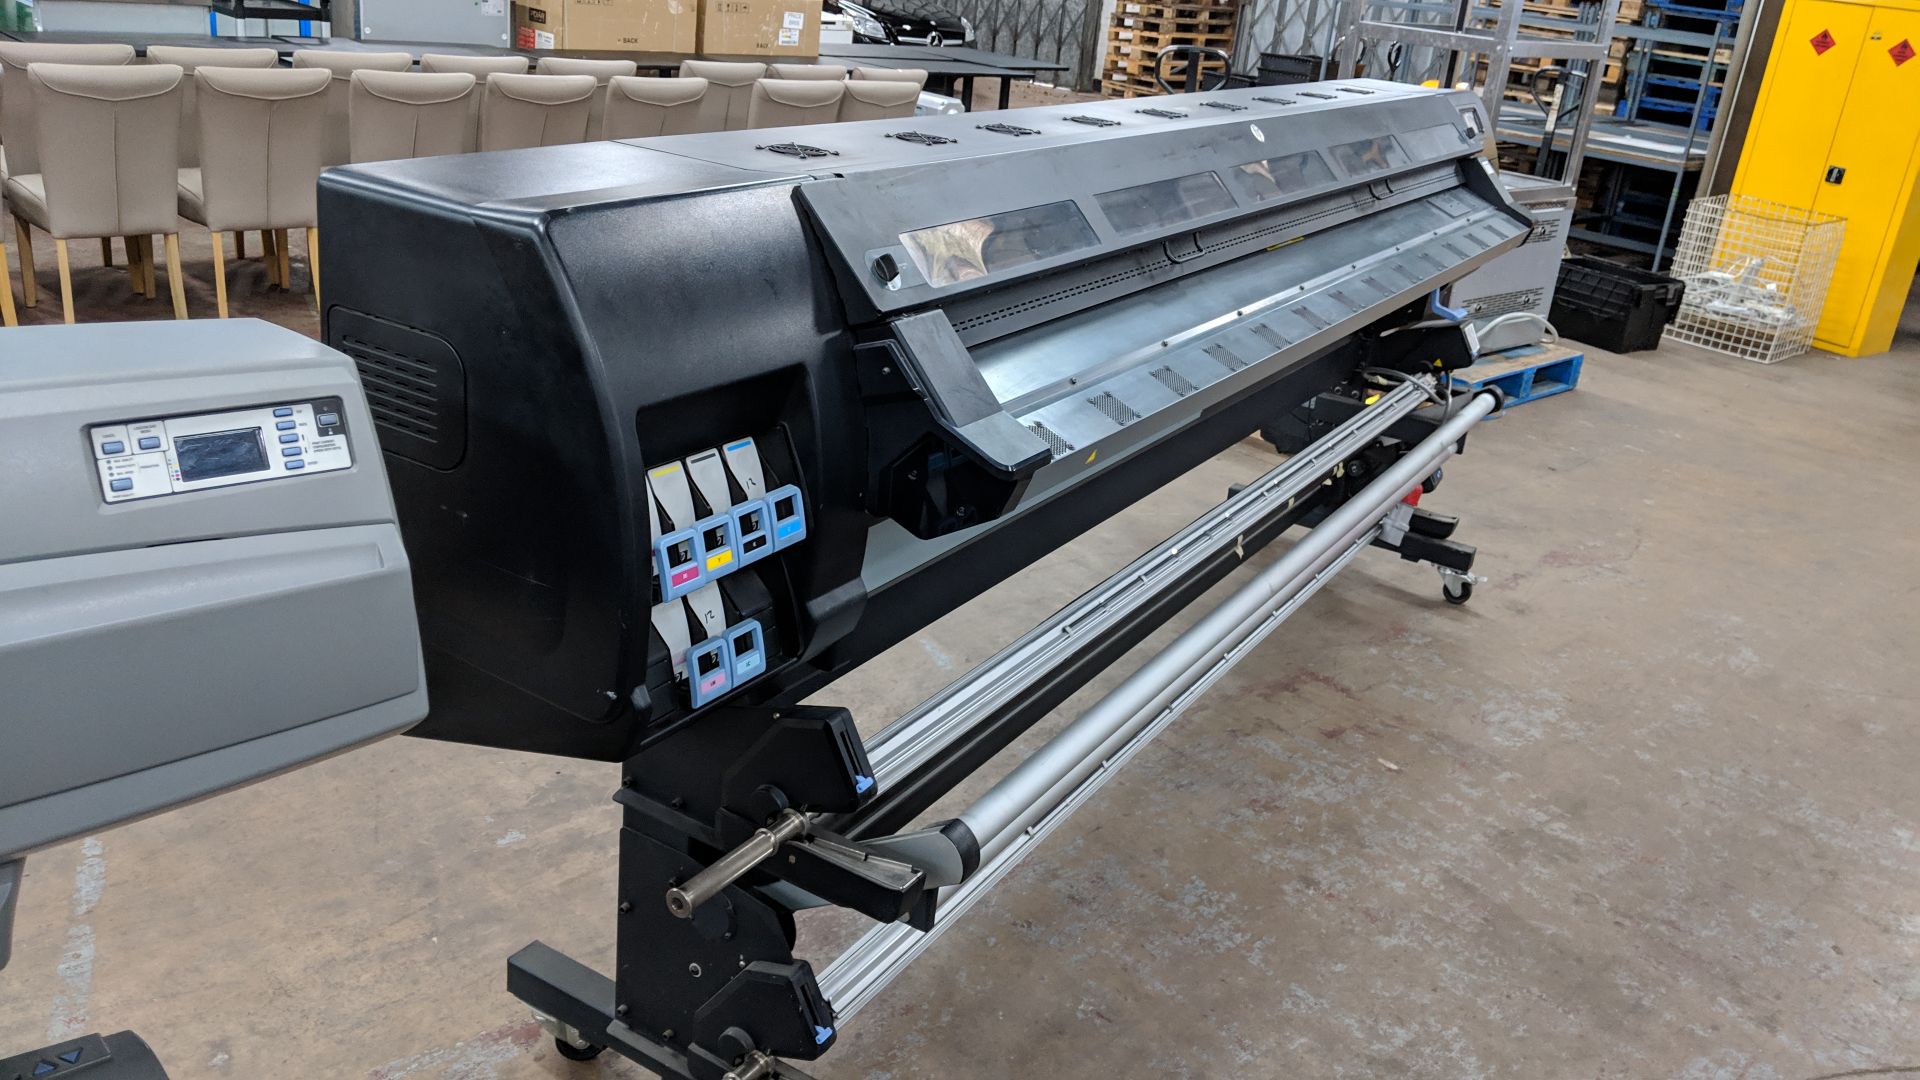 HP DesignJet L28500 latex 103.9" wide format printer, serial no. MY23F24009, product no. CQ871A - Image 6 of 12